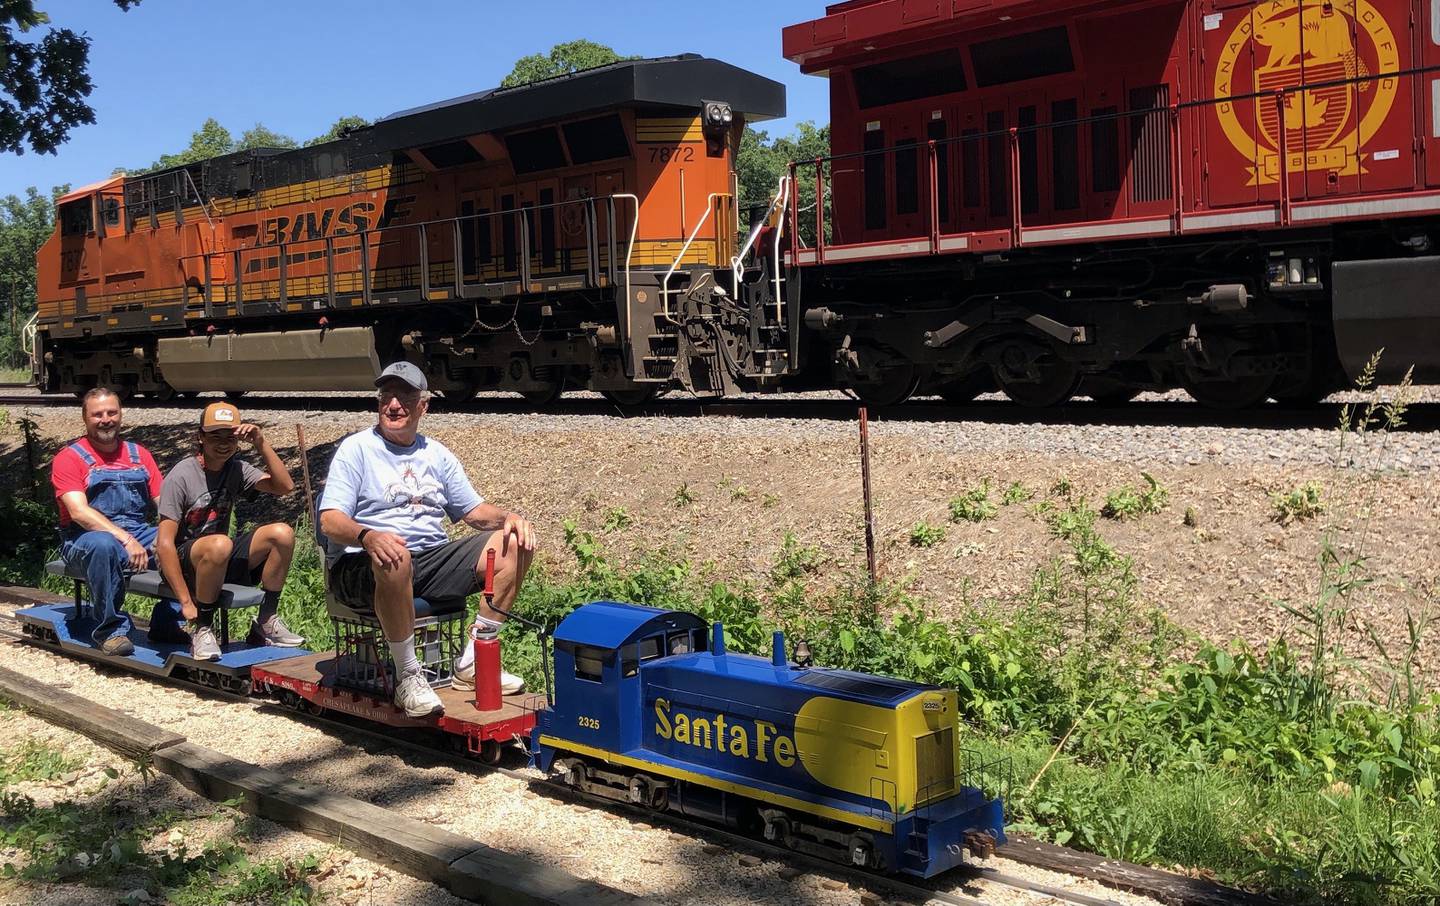 George Werderich with his father Wally Werderich and grandfather George A. Werderich riding their 7.5 gauge train on the Prairie State Railroad in Plowman's Park. (photo provided)